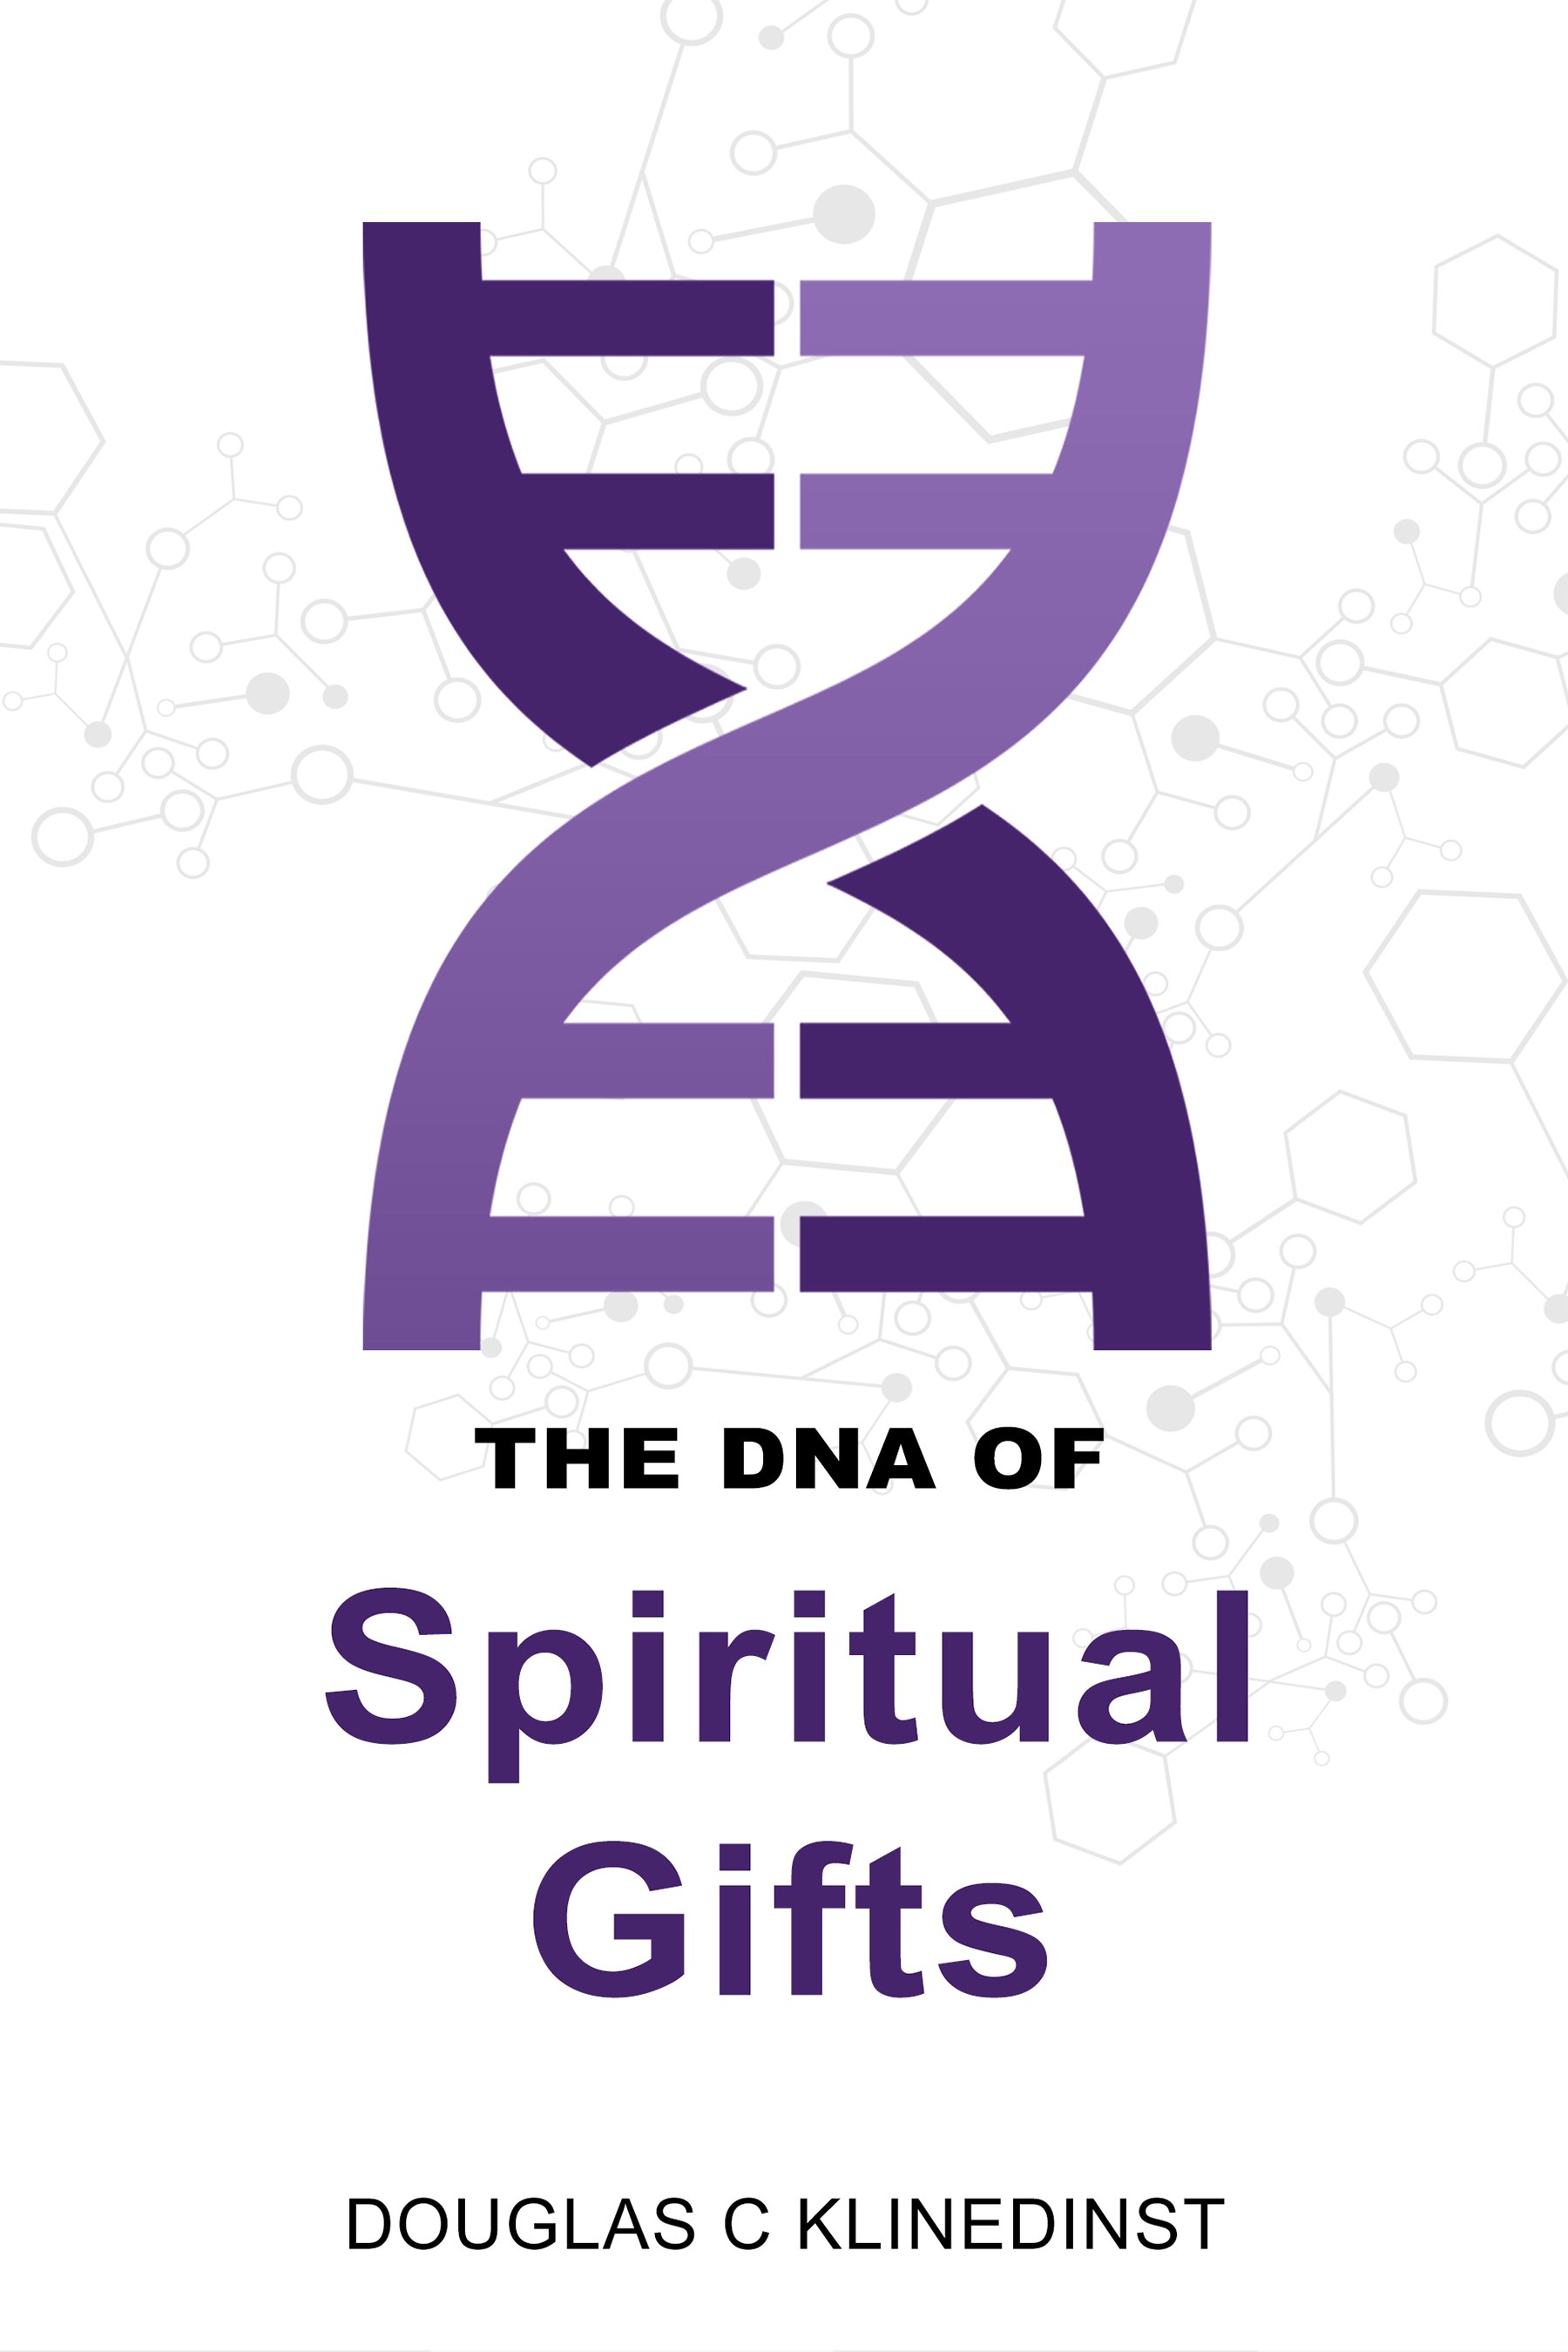 The DNA of Spiritual Gifts